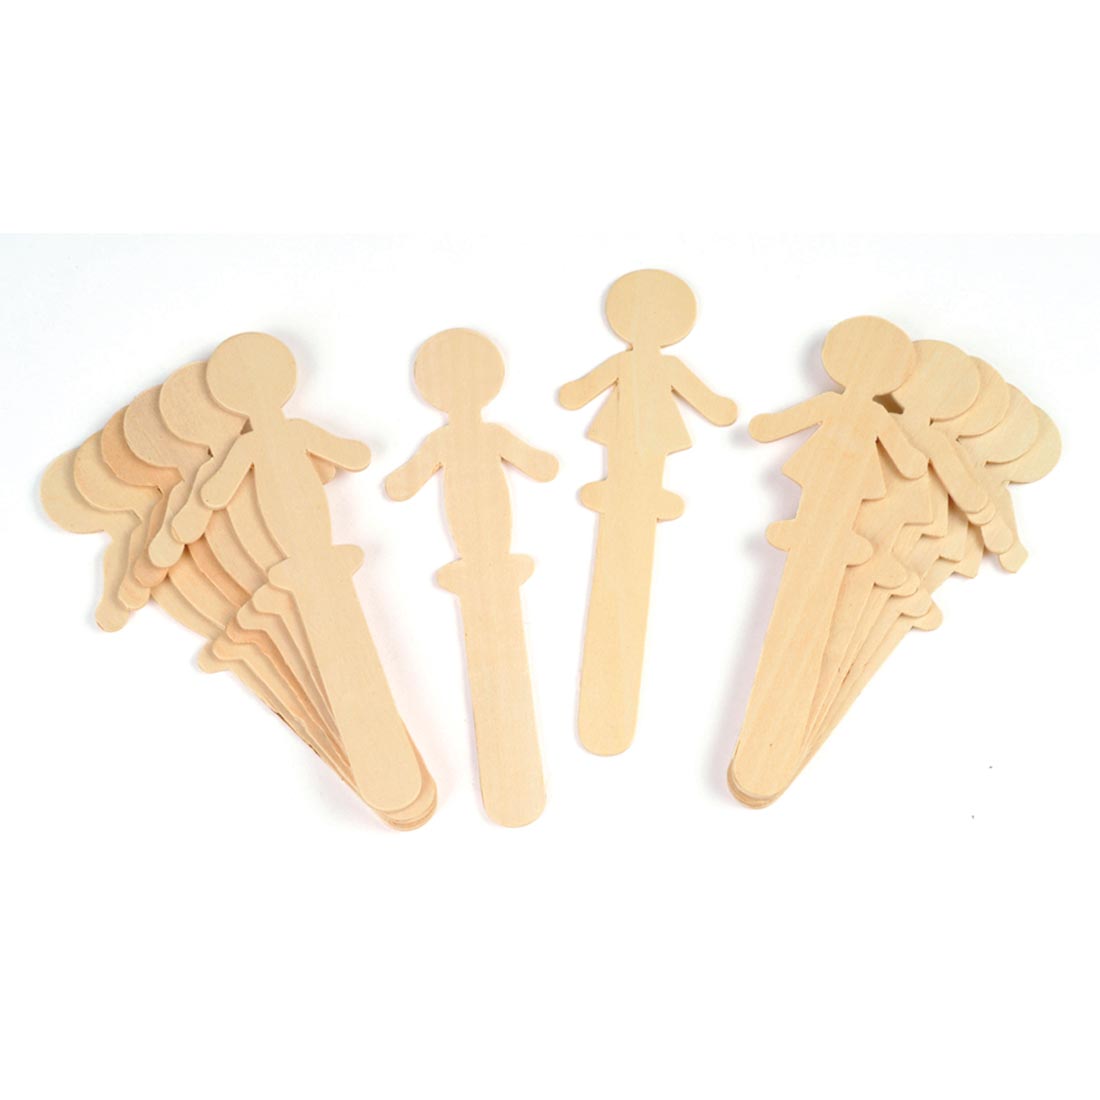 Creativity Street wooden sticks with boy or girl shapes at one end